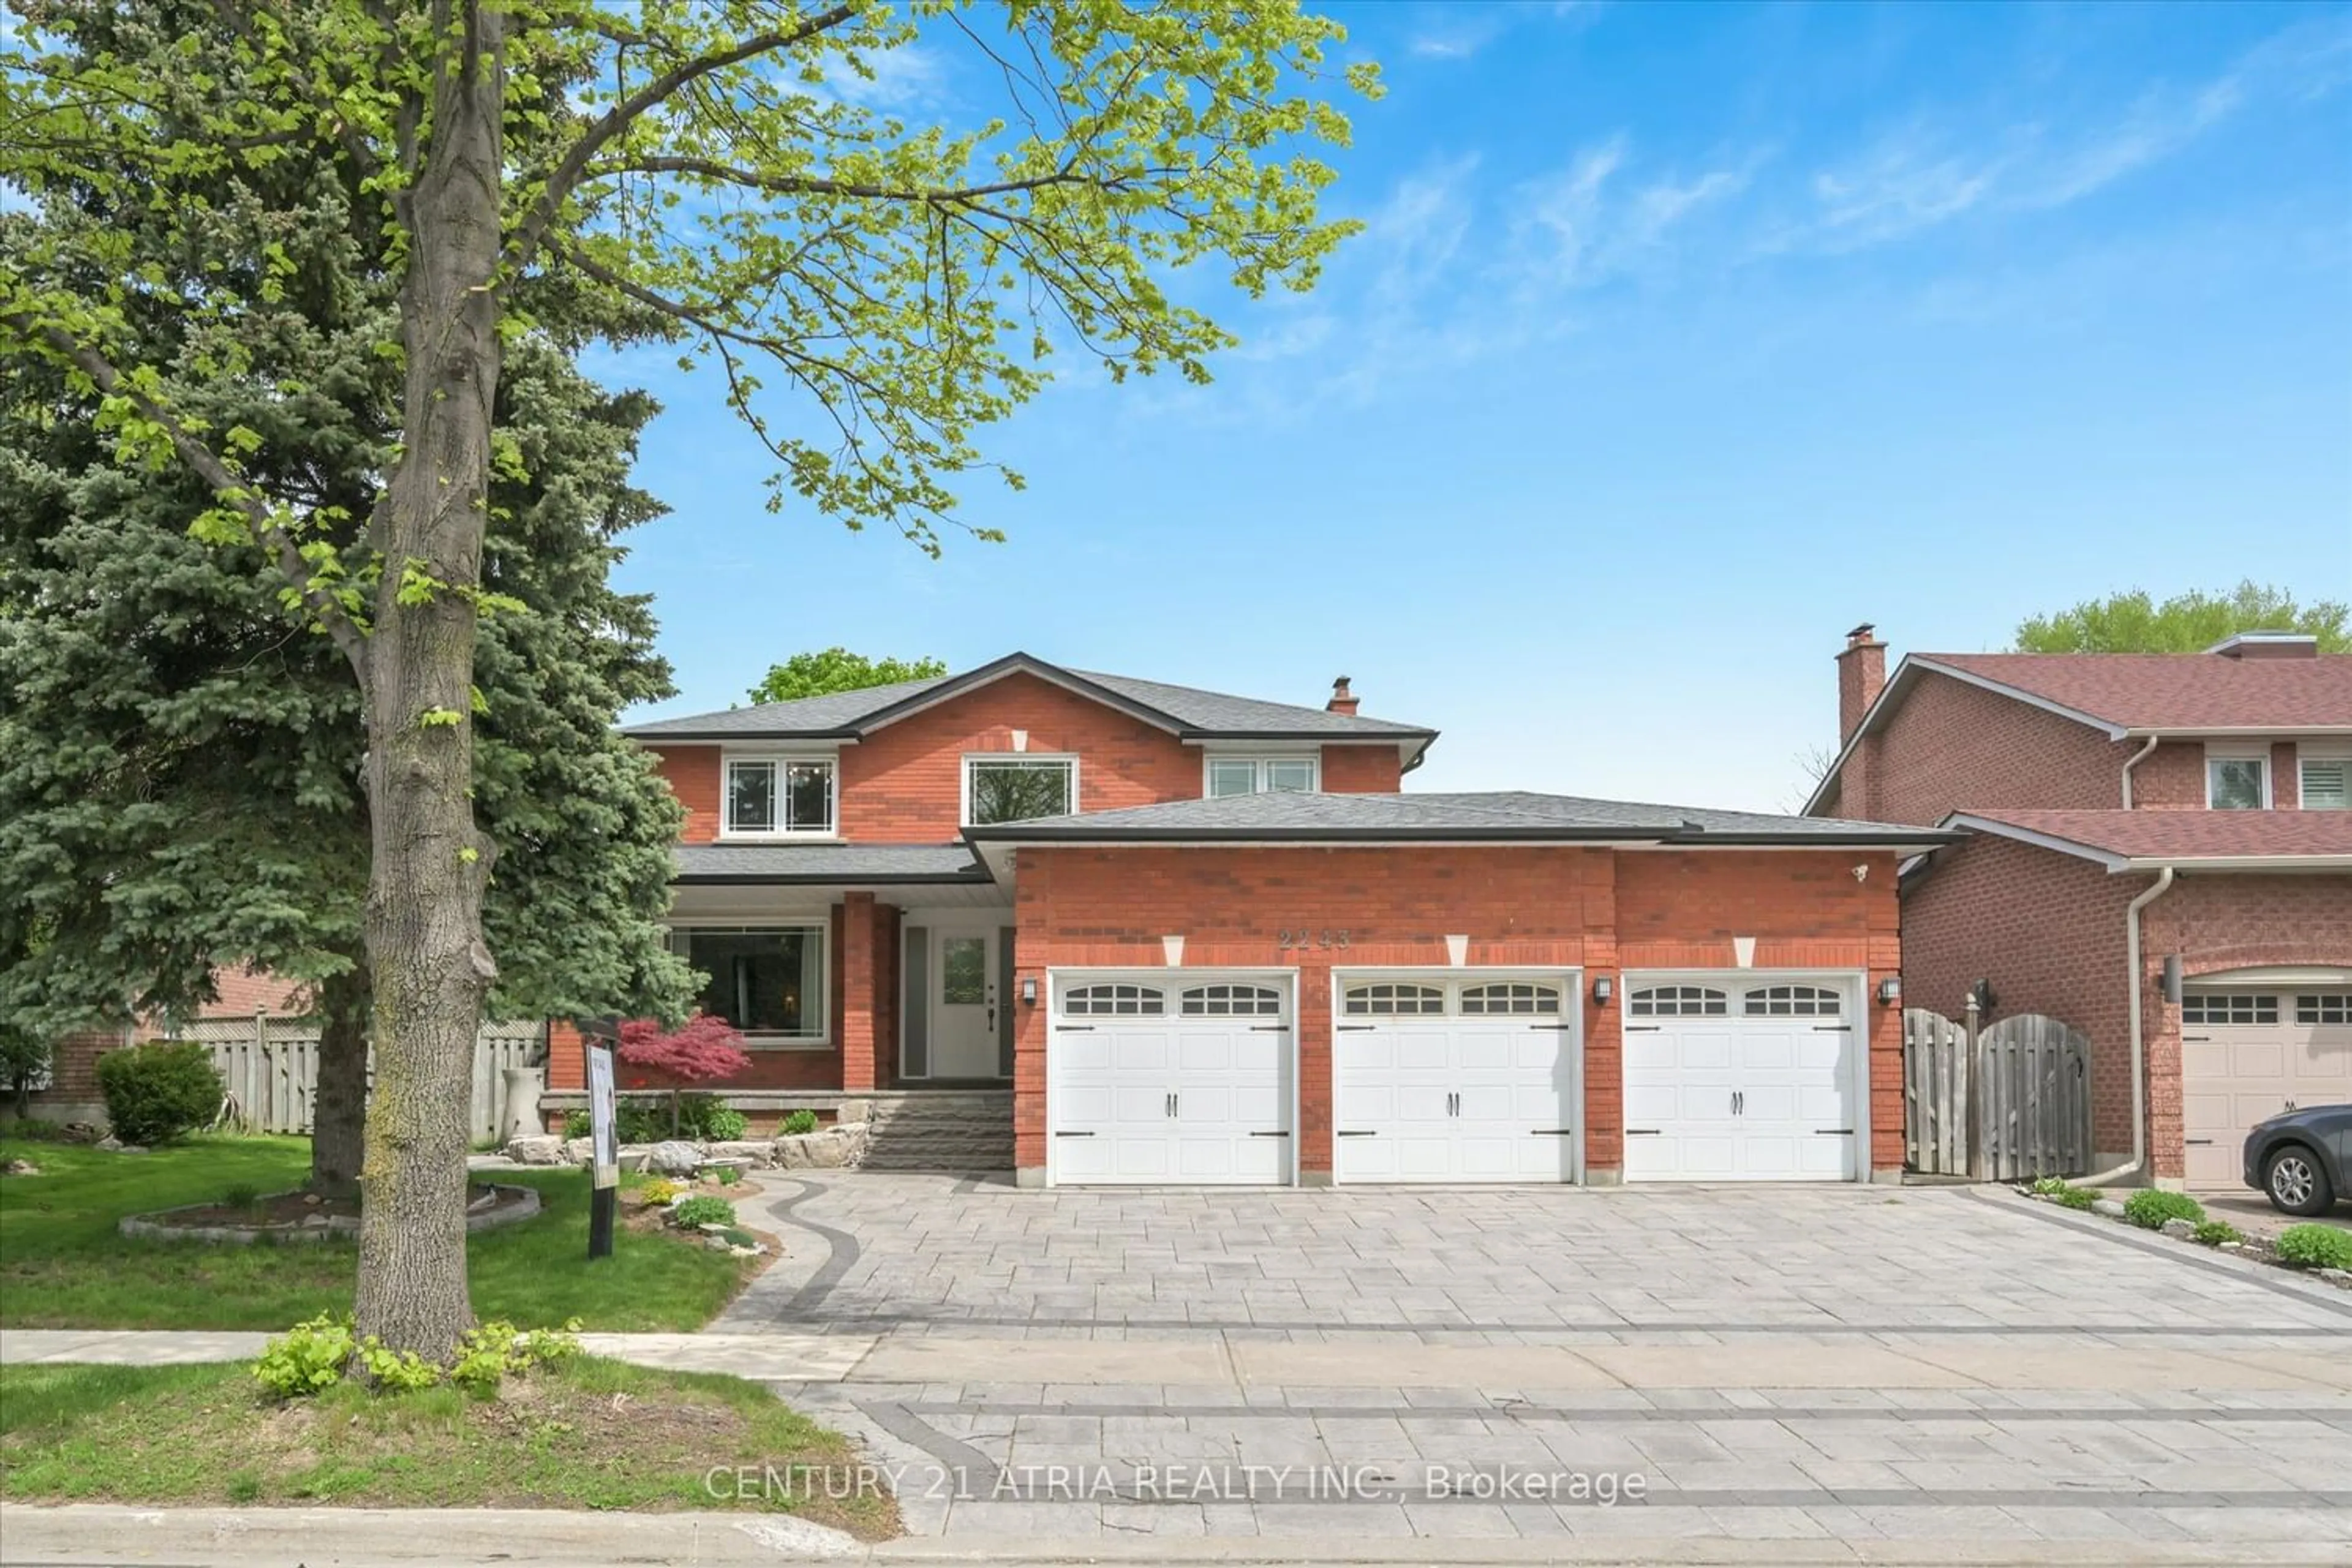 Home with brick exterior material for 2243 Rodick Rd, Markham Ontario L6C 1R1